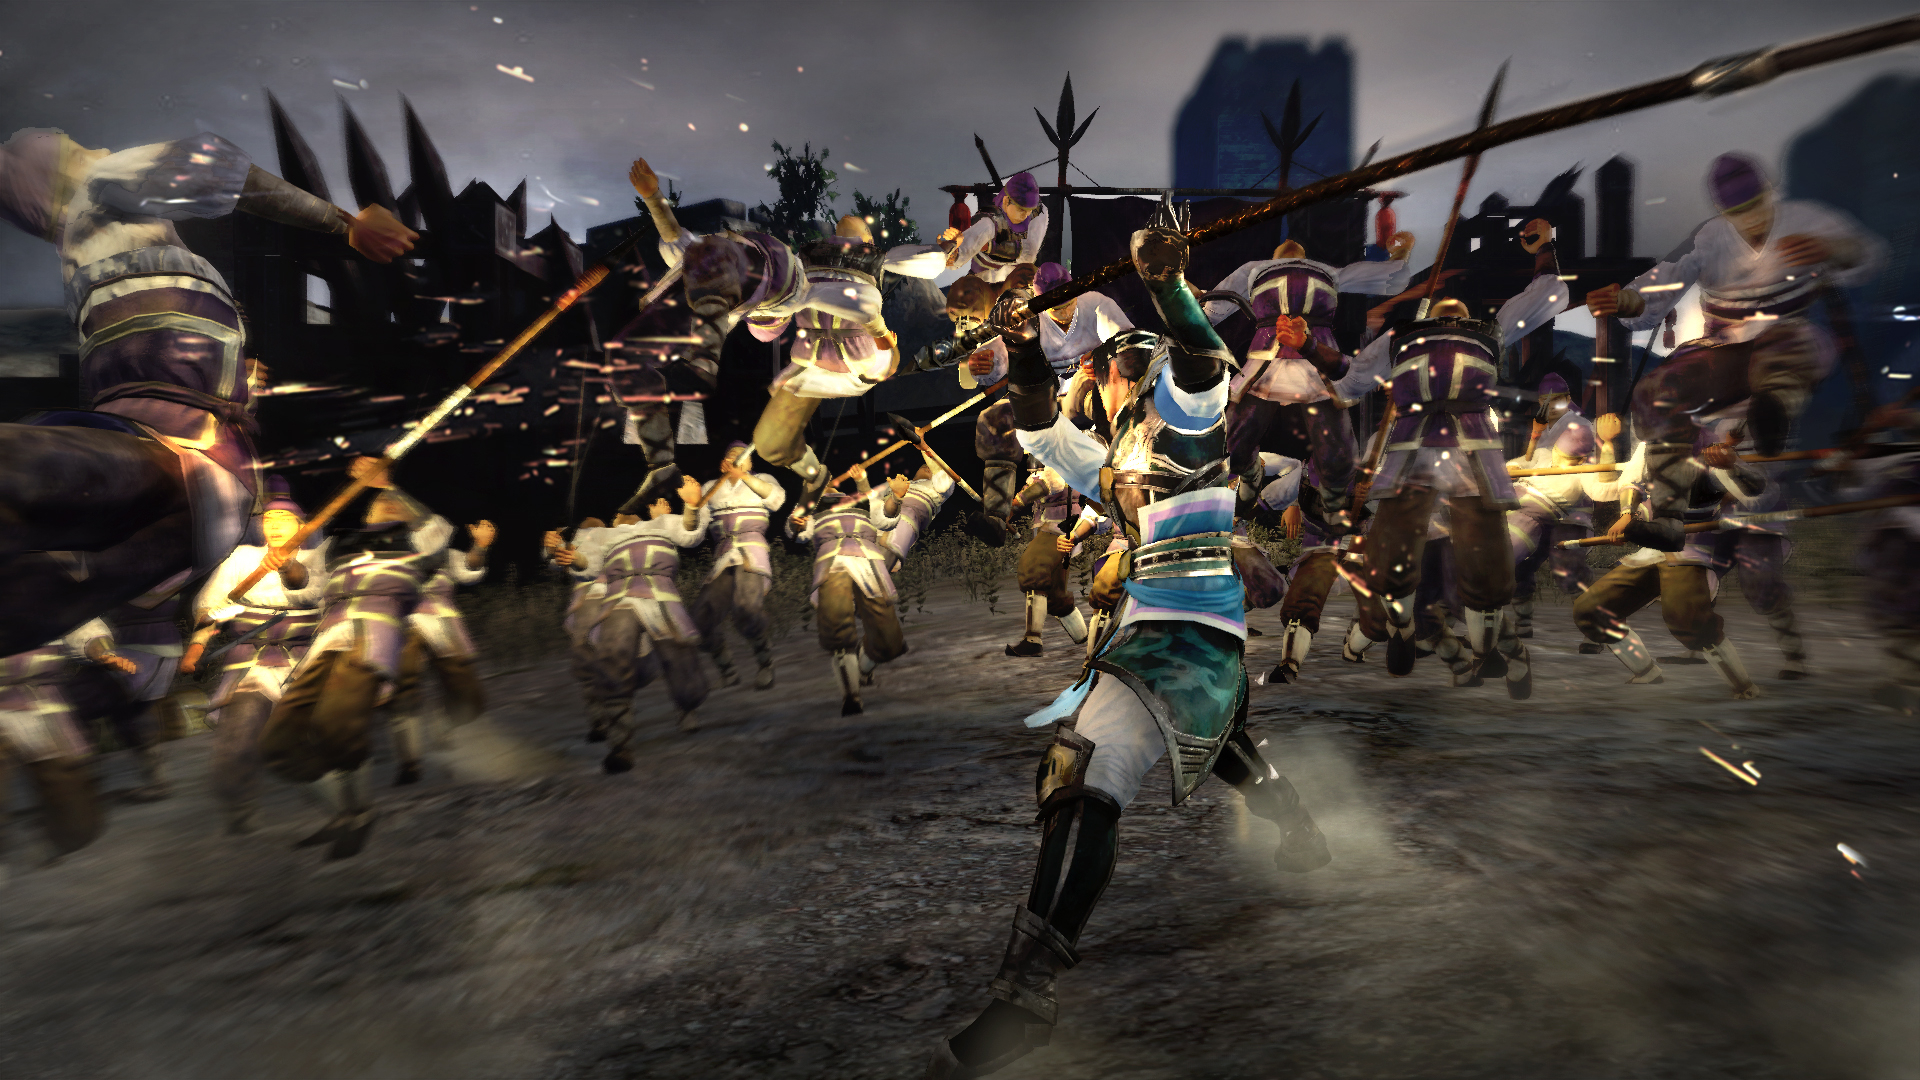 download dynasty warriors 8 xtreme legends pc